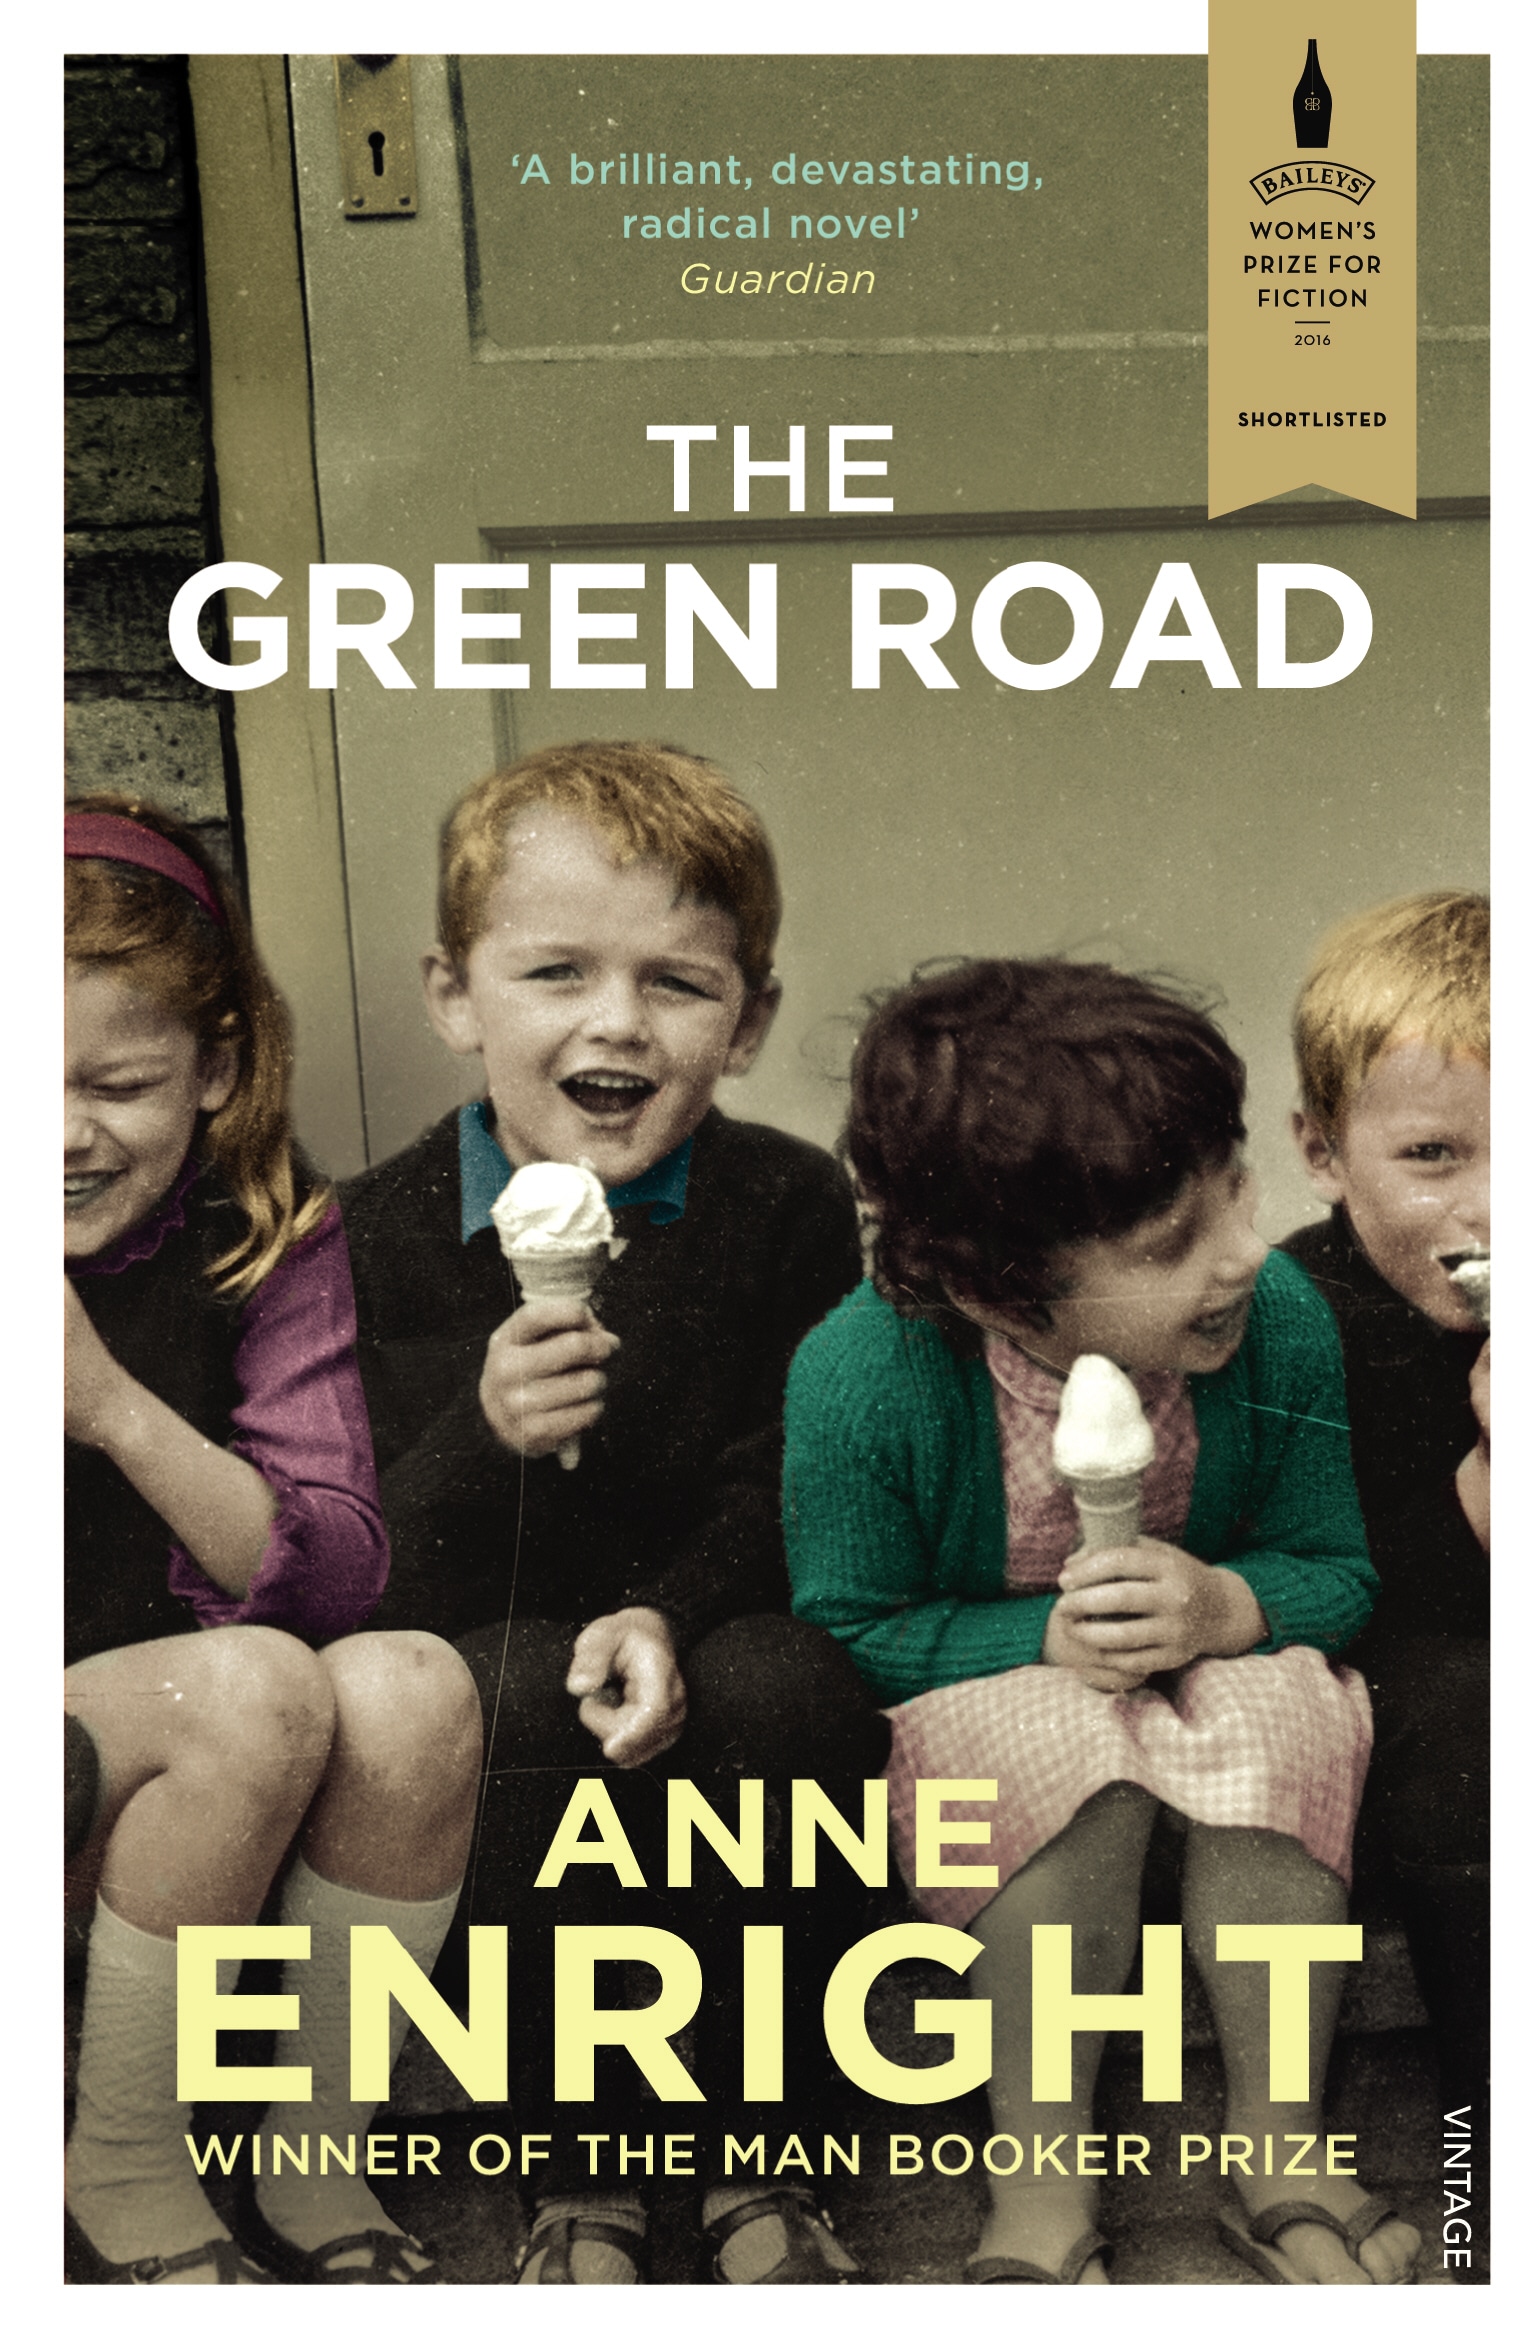 Book “The Green Road” by Anne Enright — January 7, 2016